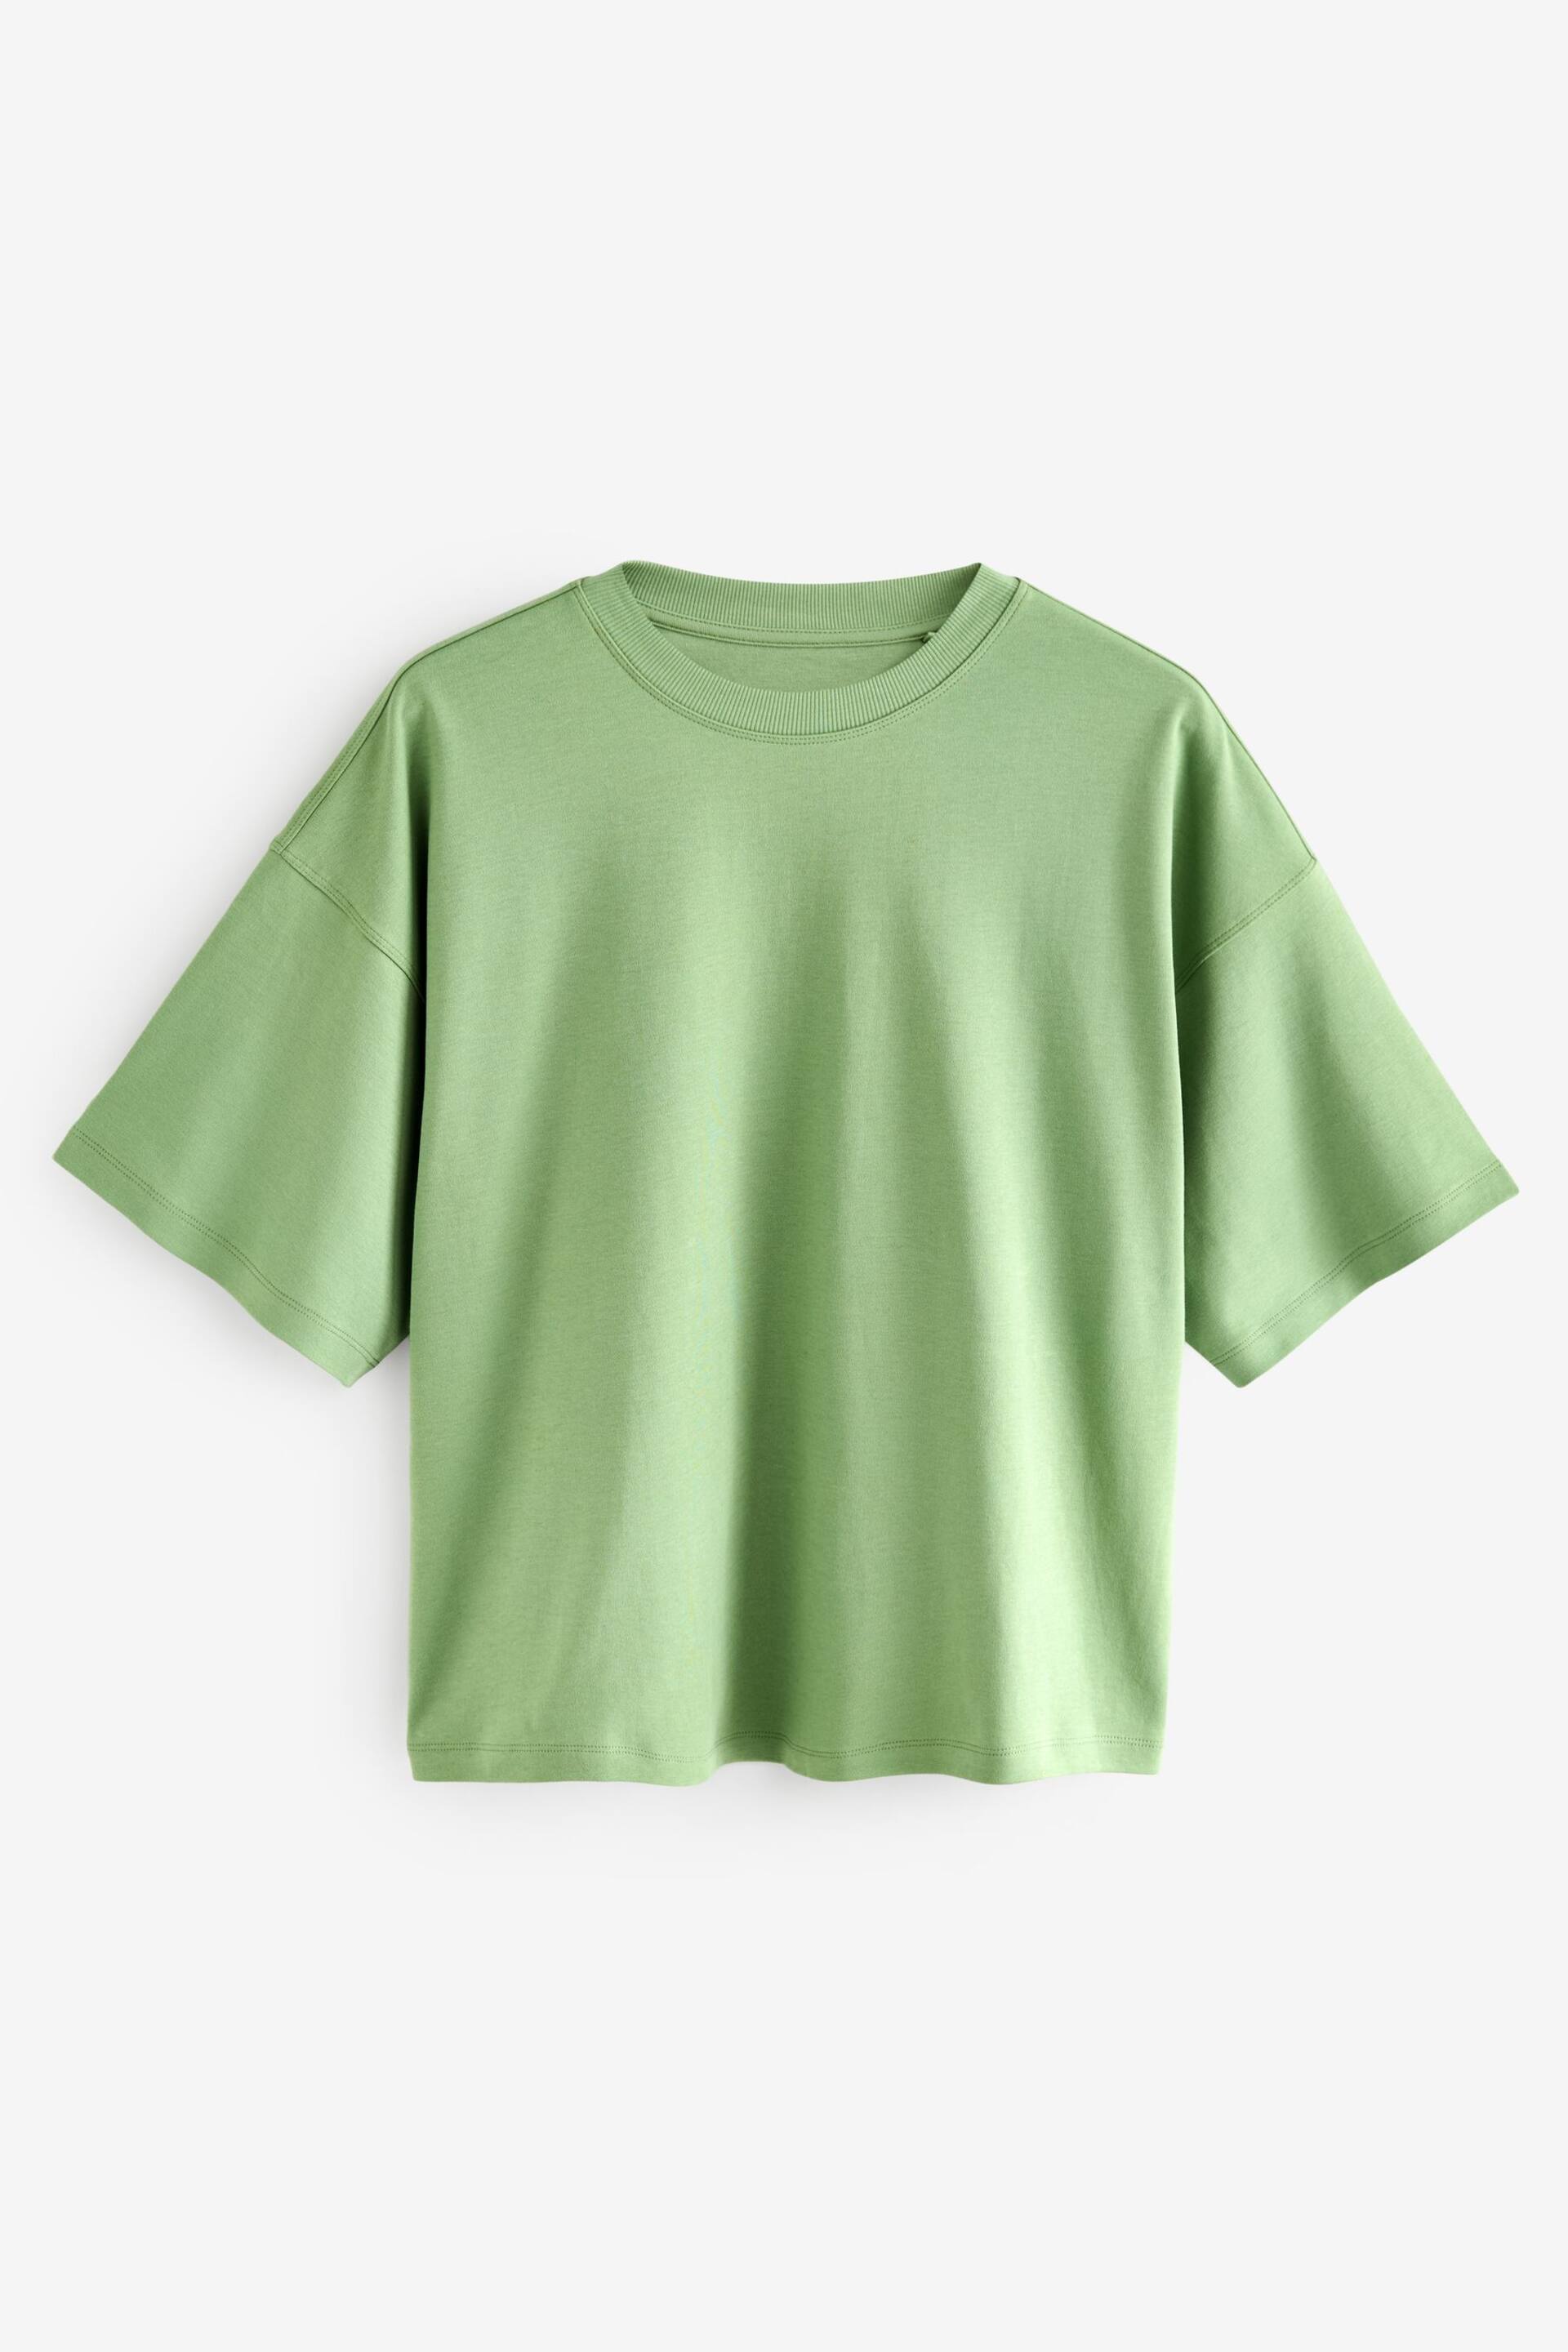 Matcha Green 100% Cotton Heavyweight Relaxed Fit Crew Neck T-Shirt - Image 6 of 7